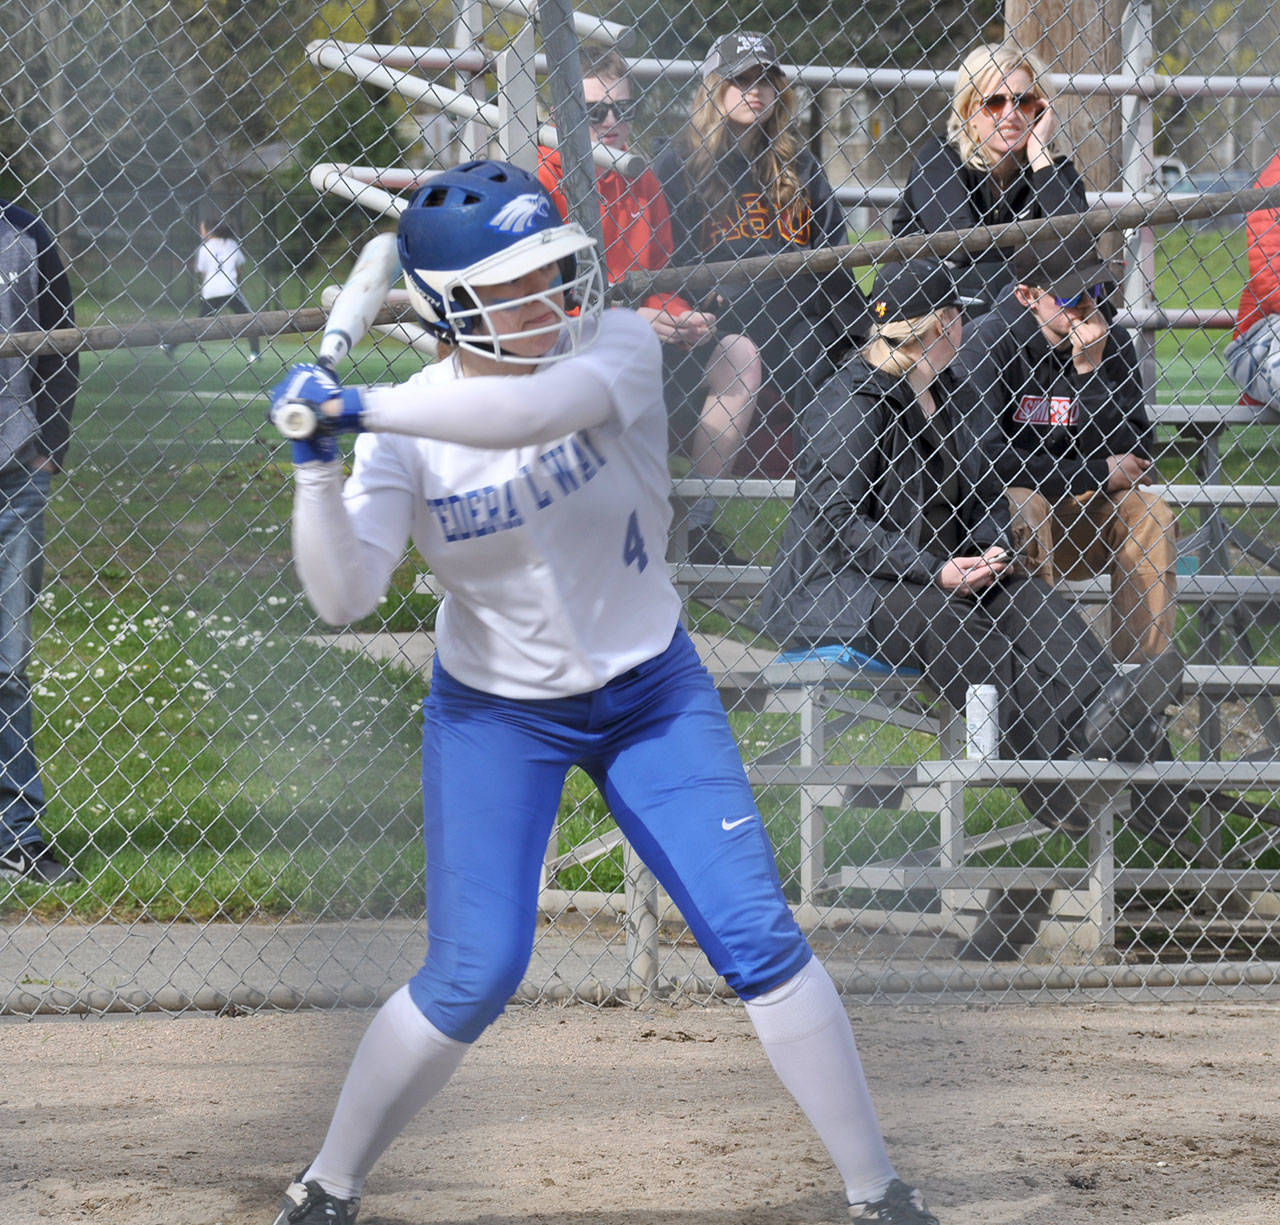 Federal Way’s Cassandra Wright waits for a pitch during the Eagles’ loss to Enumclaw on Wednesday. Wright hit a two-run home run later in the at bat. HEIDI JACOBS, the Mirror